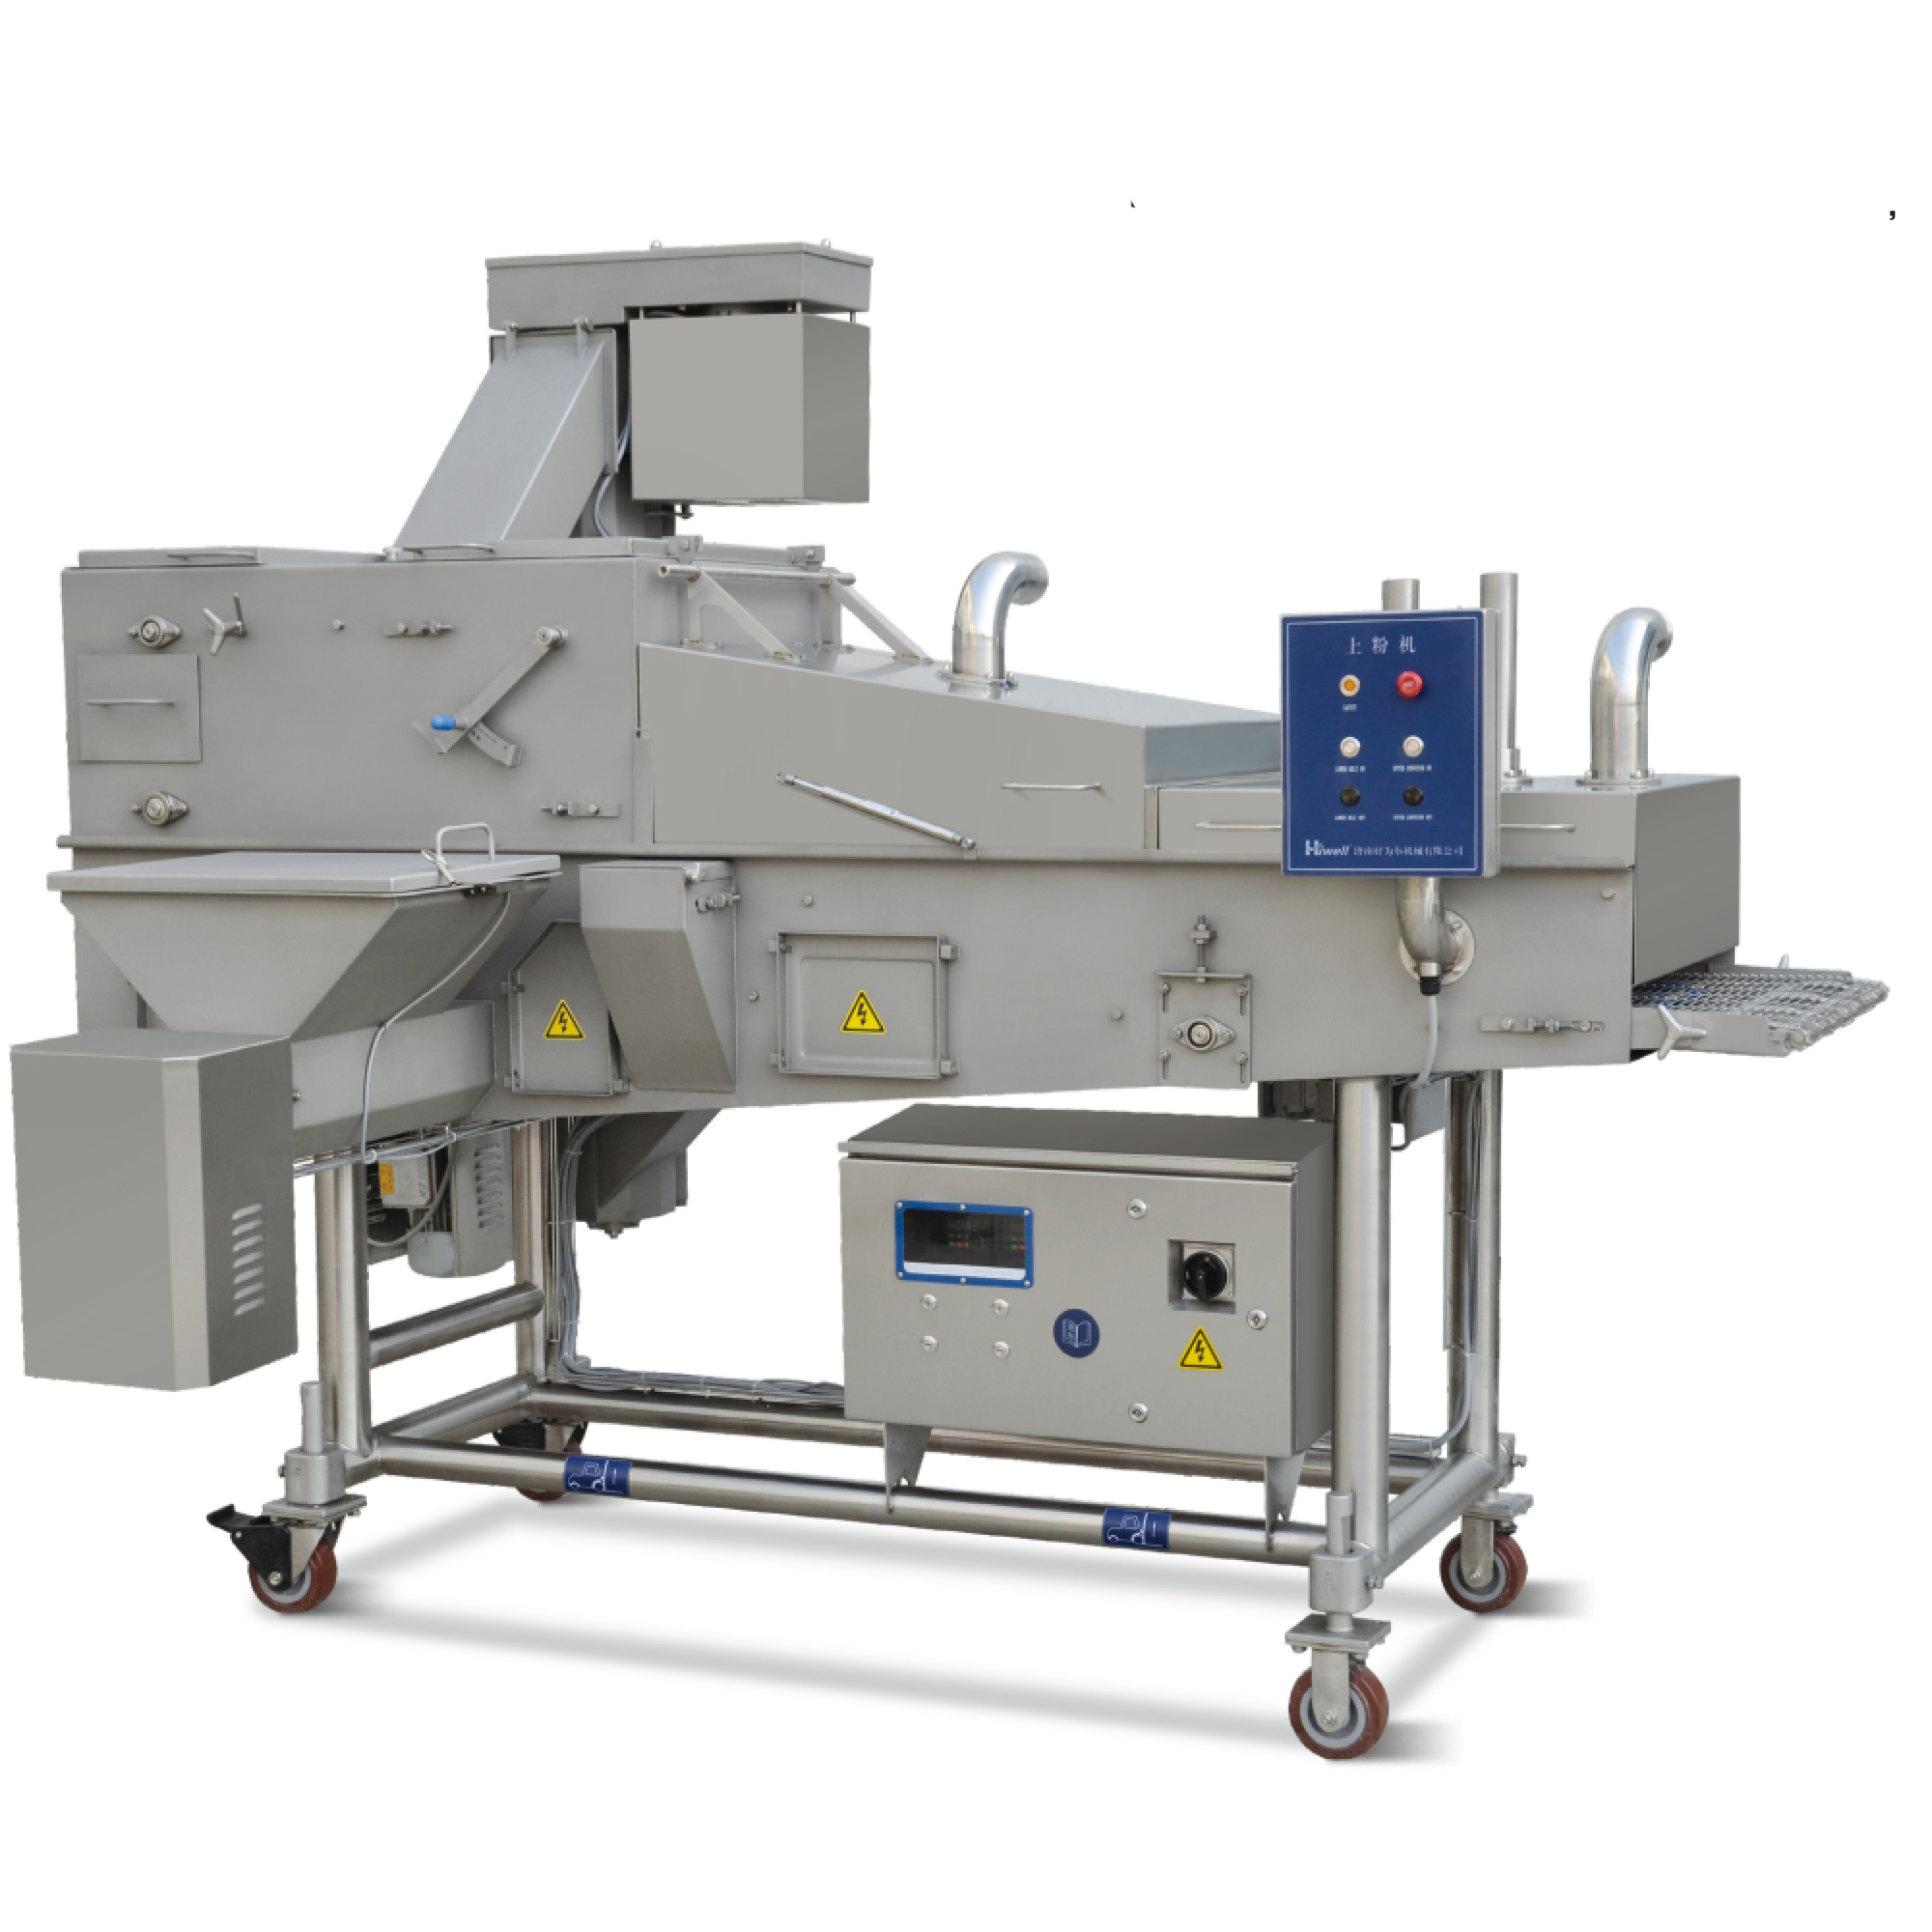 What is a flour coating machine